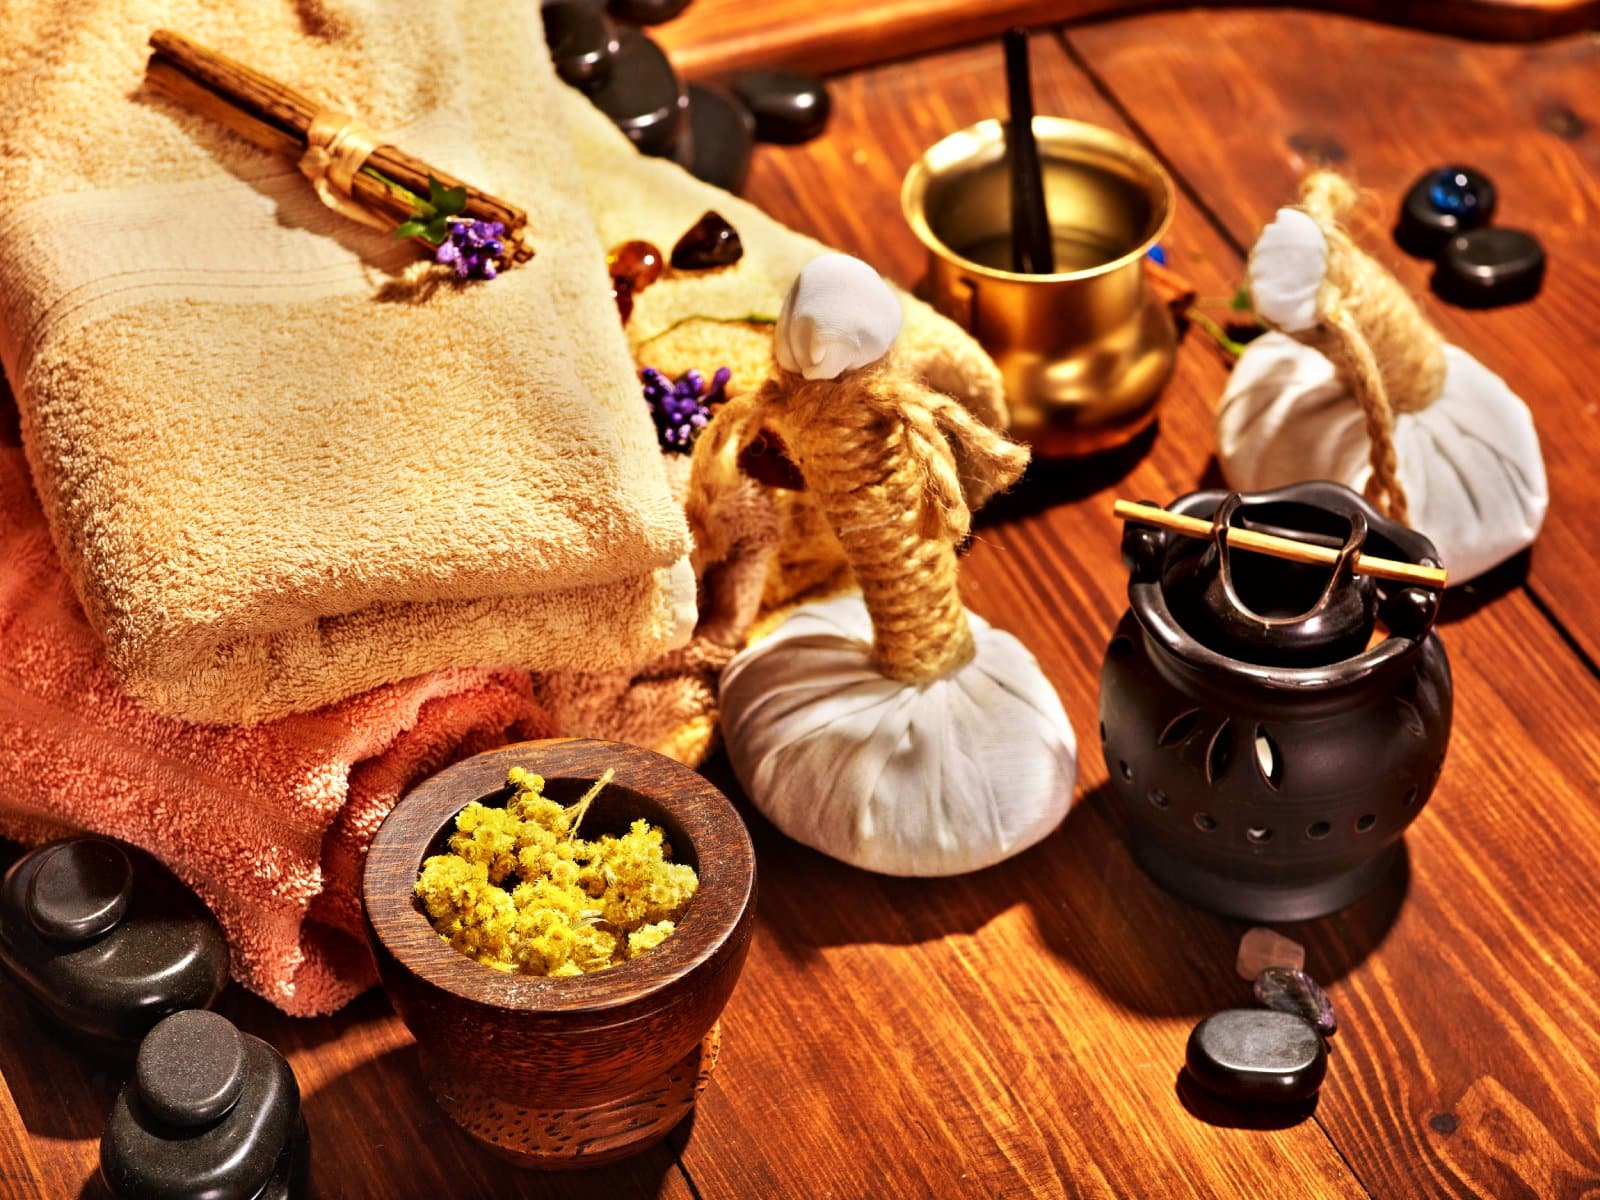 <p class="wp-caption-text">Image Credit: Shutterstock / Poznyakov</p>  <p><span>Following your consultation, a personalized treatment plan is crafted, embodying the essence of Ayurvedic healing tailored to your unique constitution. This plan integrates a variety of therapies, including massages with medicated oils, herbal treatments, steam baths, and cleansing techniques, all designed to detoxify and nourish your body at a cellular level. </span></p> <p><span>Additionally, your plan will incorporate yoga and meditation sessions to harmonize the mind, body, and spirit, enhancing the therapeutic effects of the physical treatments. Embracing this comprehensive approach allows for a transformative experience, promoting lasting wellness.</span></p>